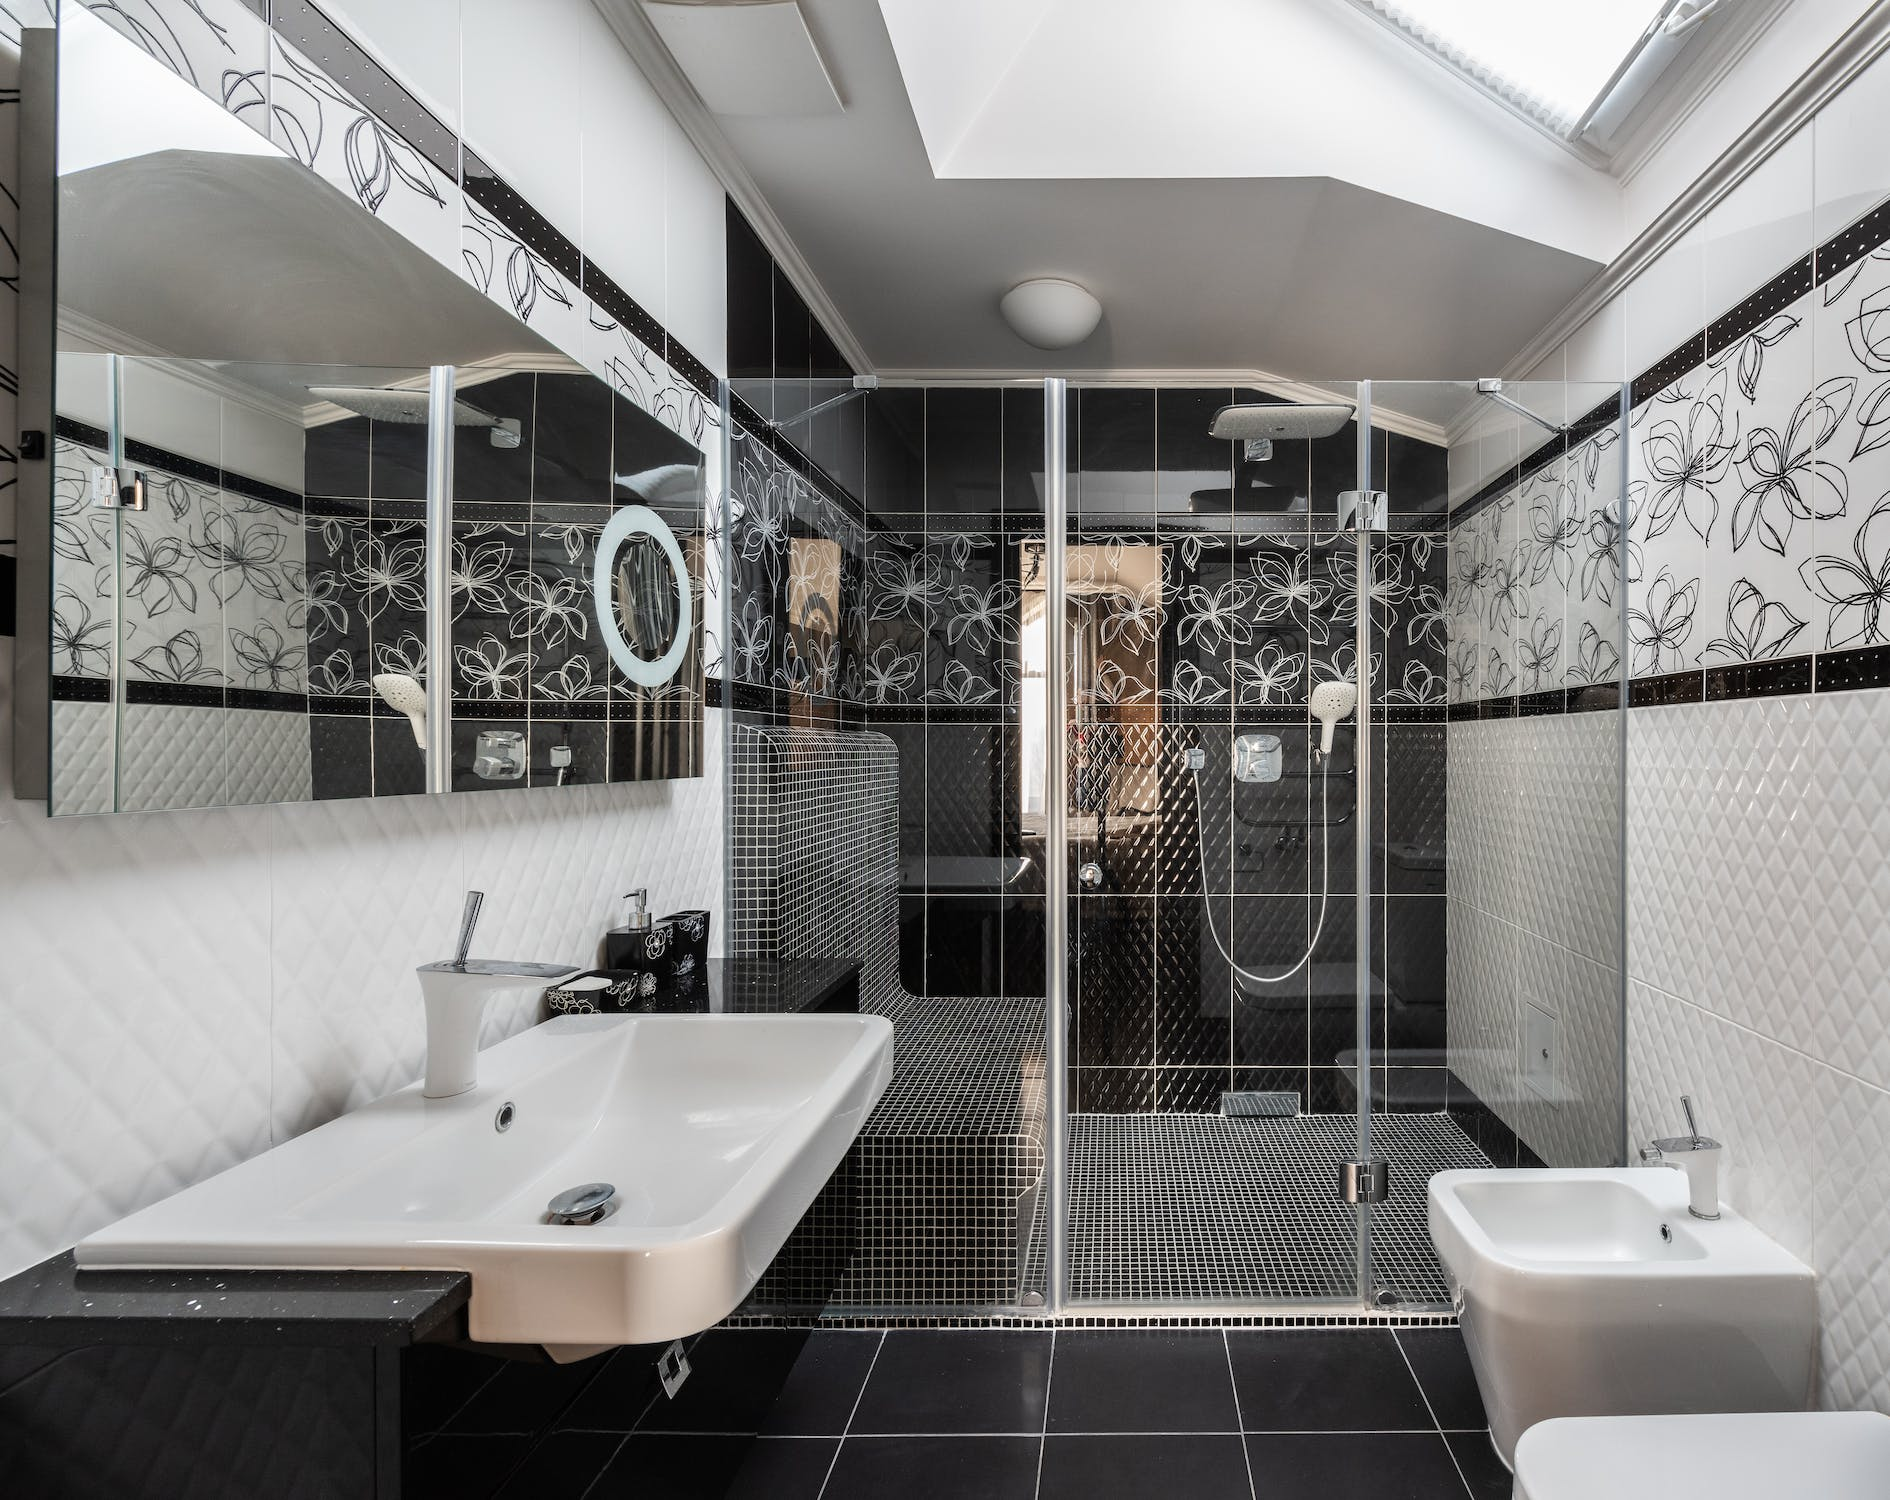 An image of a bathroom with a glass shower